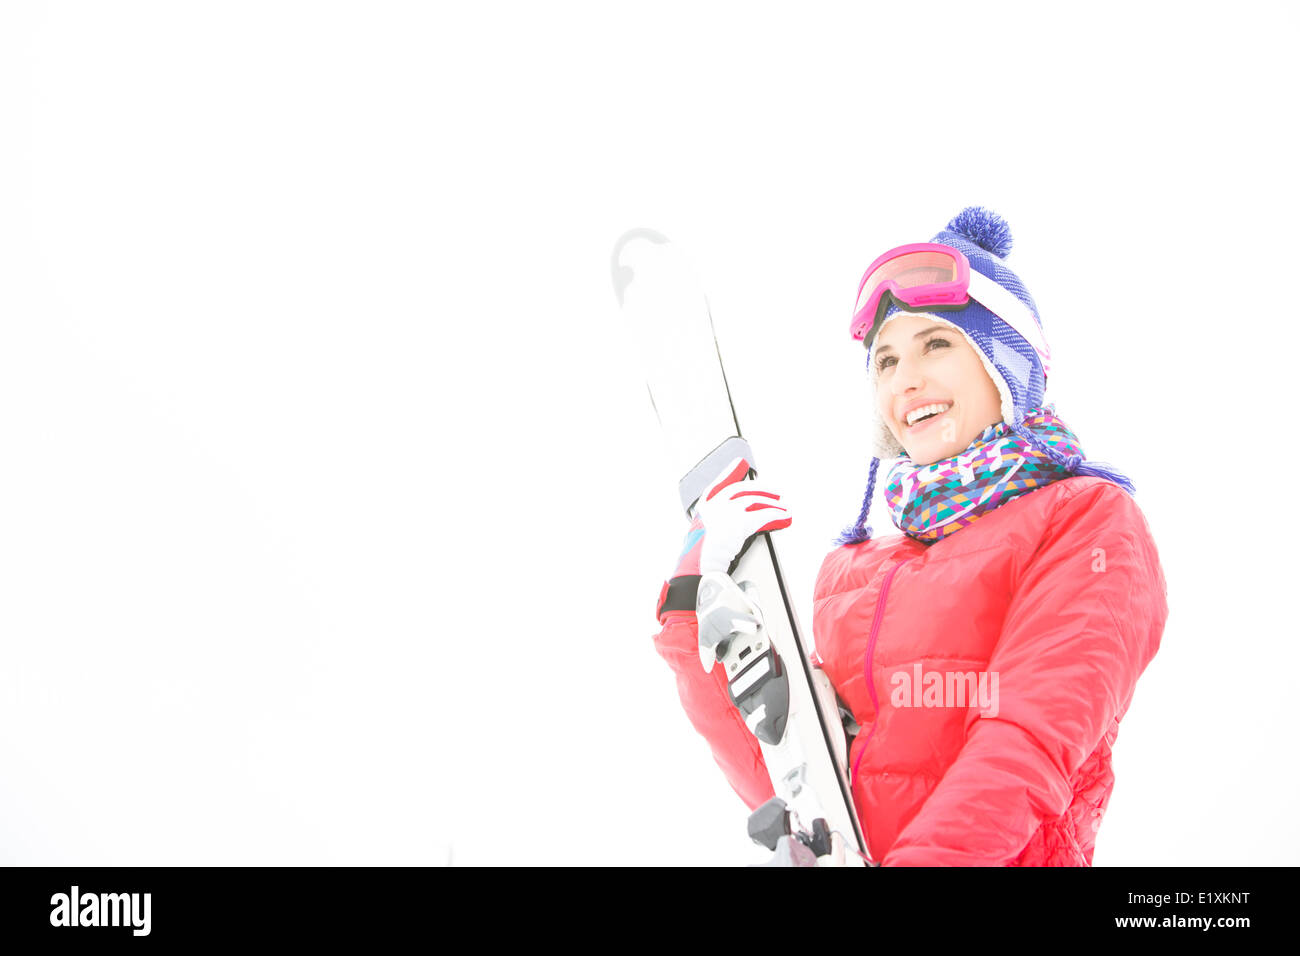 Smiling young woman carrying skis in snow Stock Photo